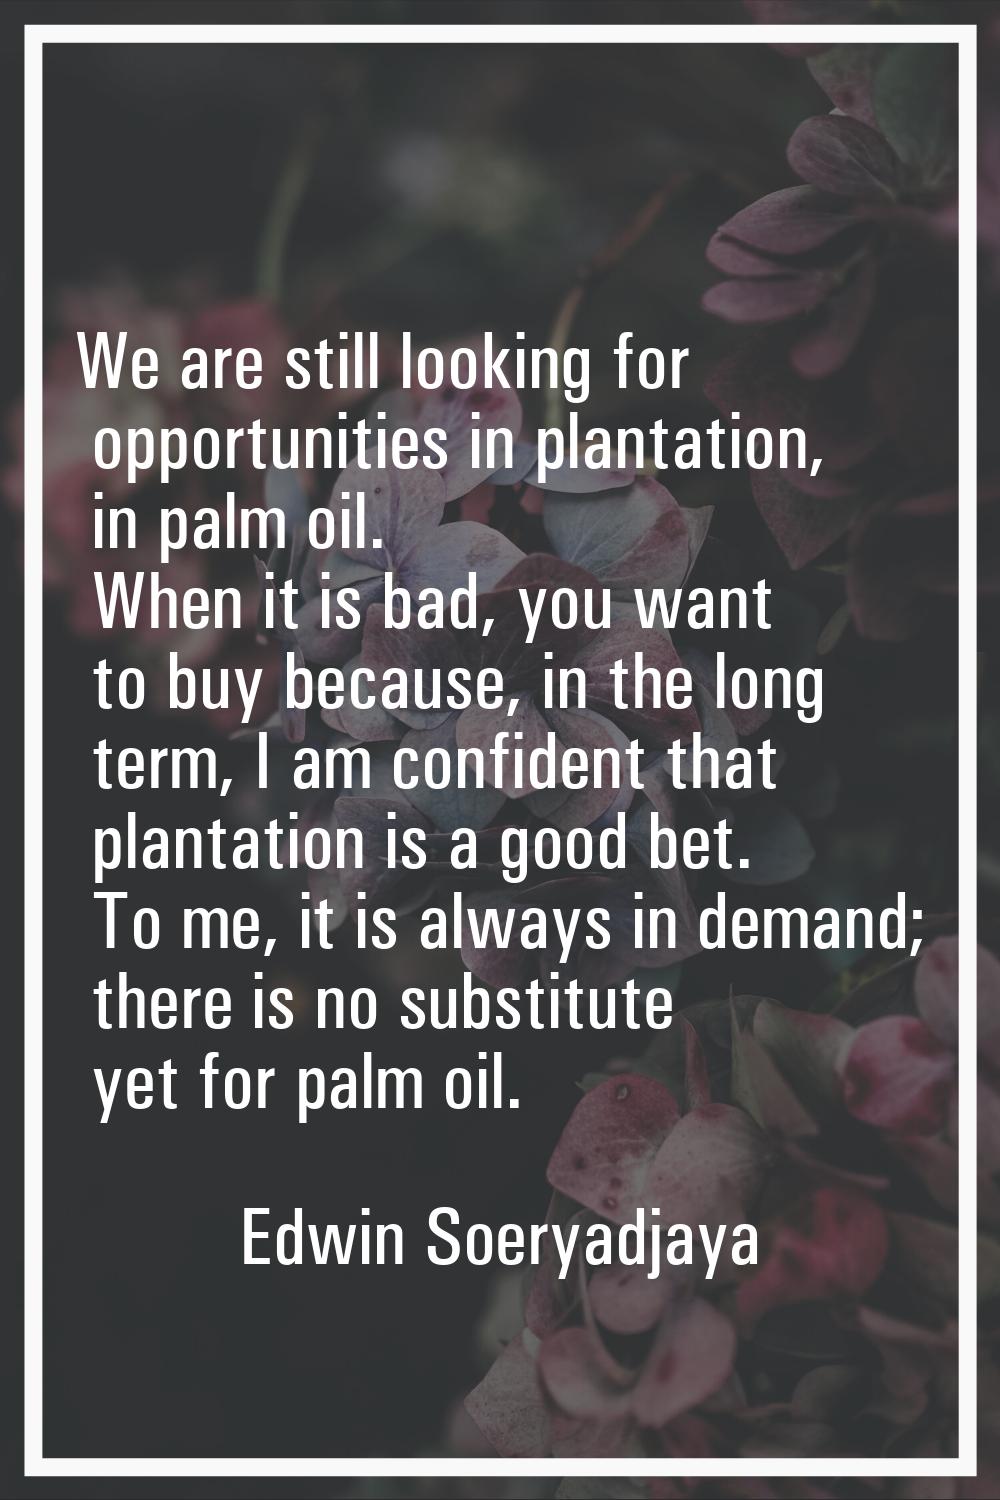 We are still looking for opportunities in plantation, in palm oil. When it is bad, you want to buy 